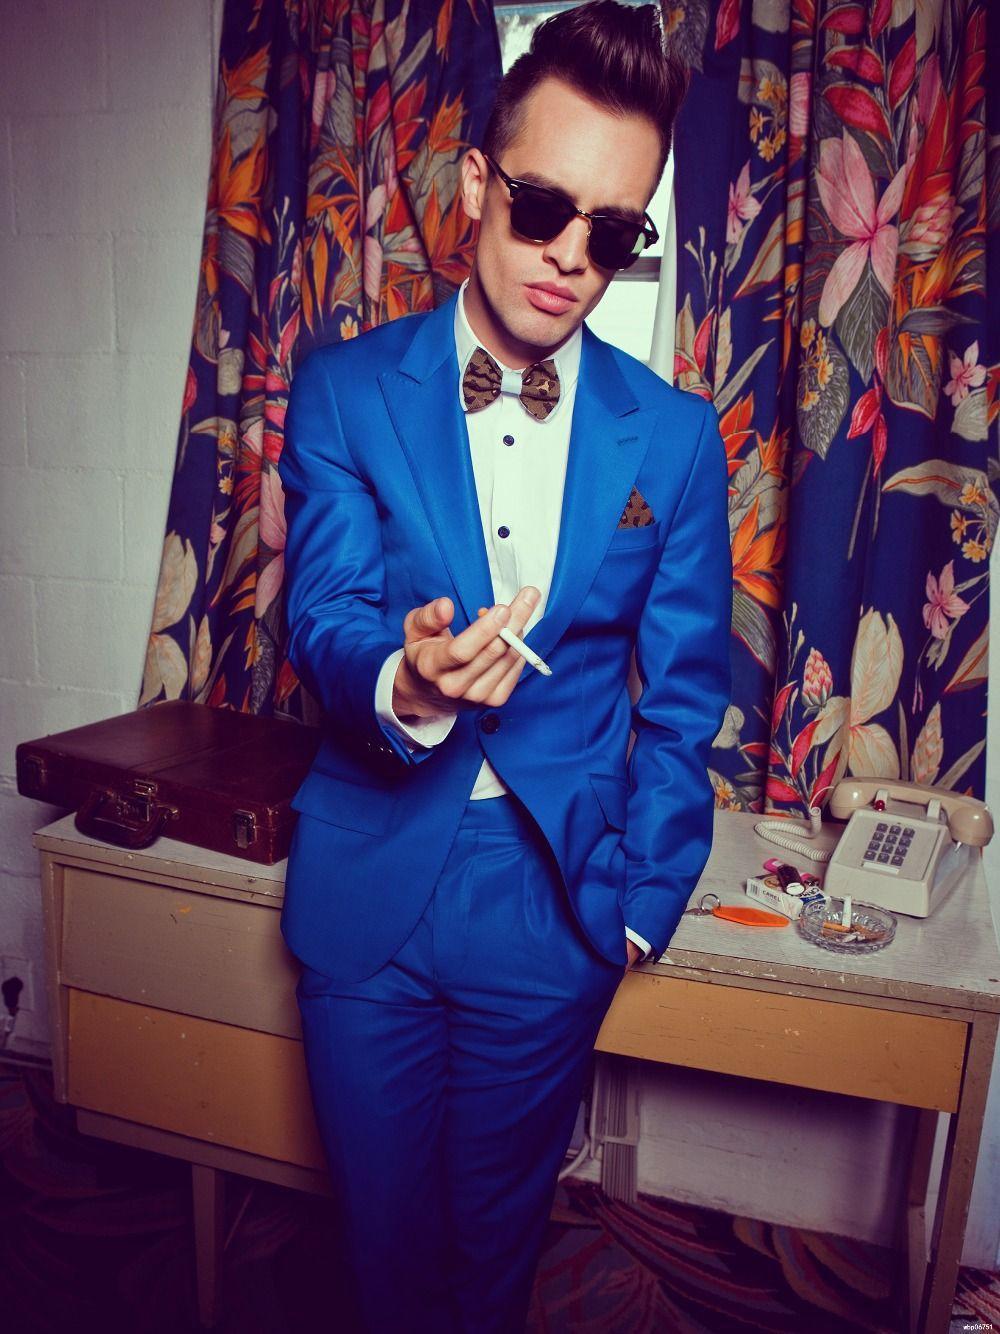 Aliexpress.com, Buy One Piece Wallpaper of Brendon Urie Rock Band